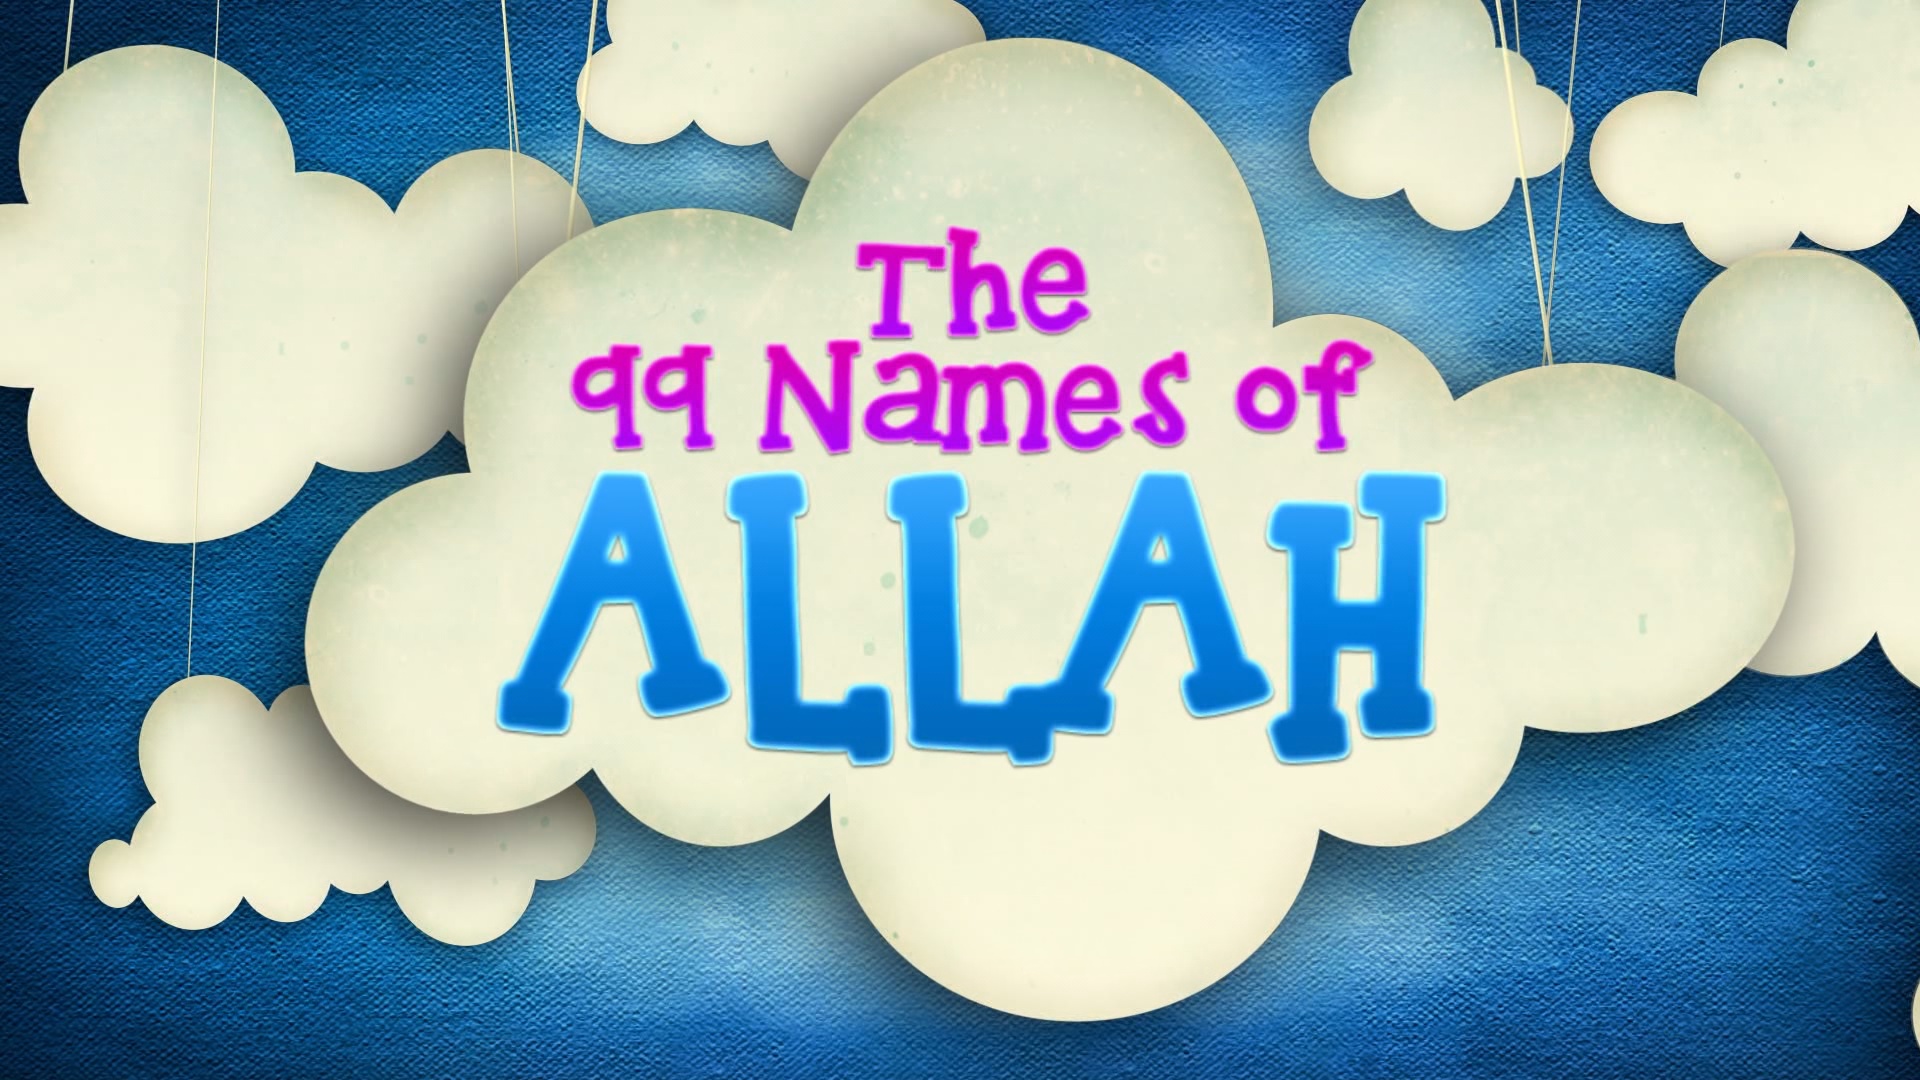 he is above everything one of 99 name of allah